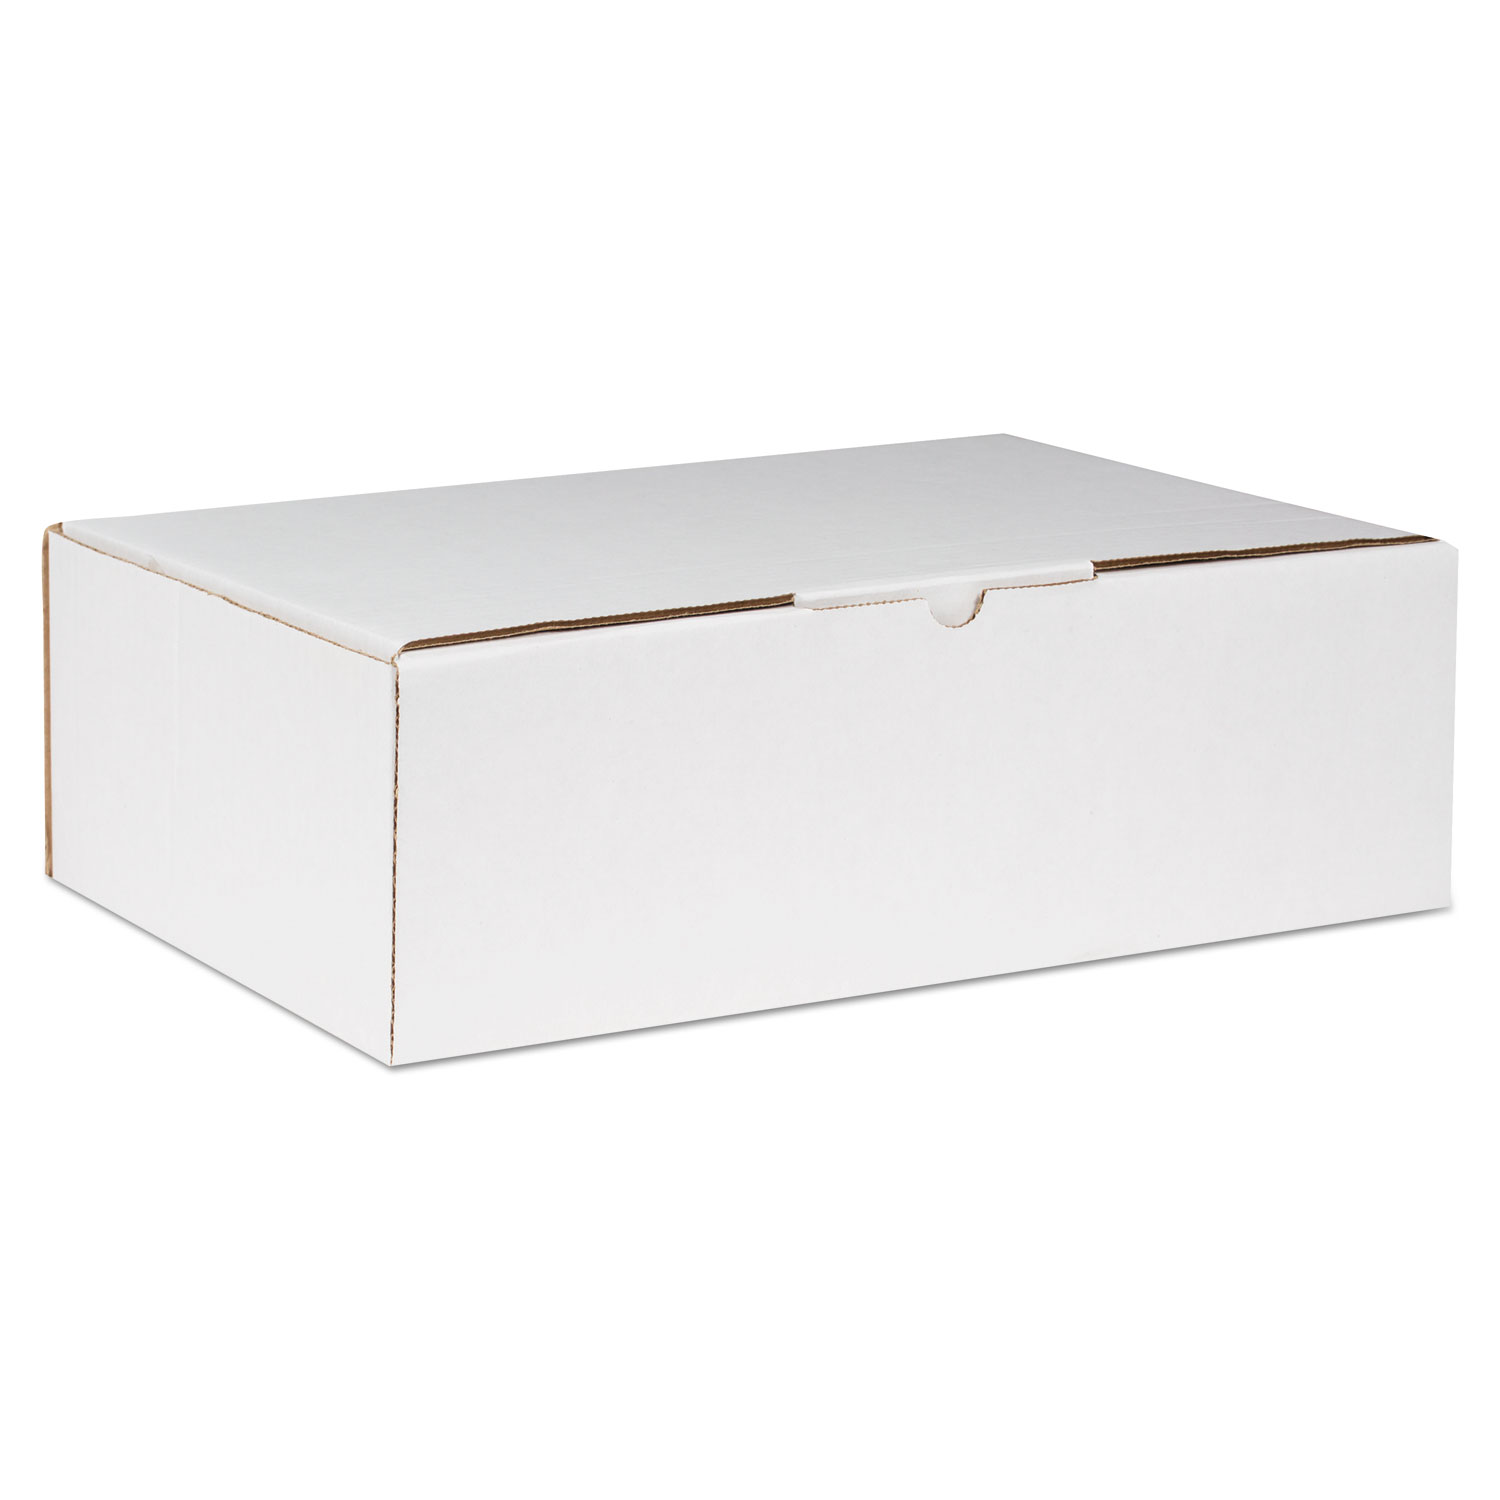 Self-Locking Mailing Box, Regular Slotted Container (RSC), 13